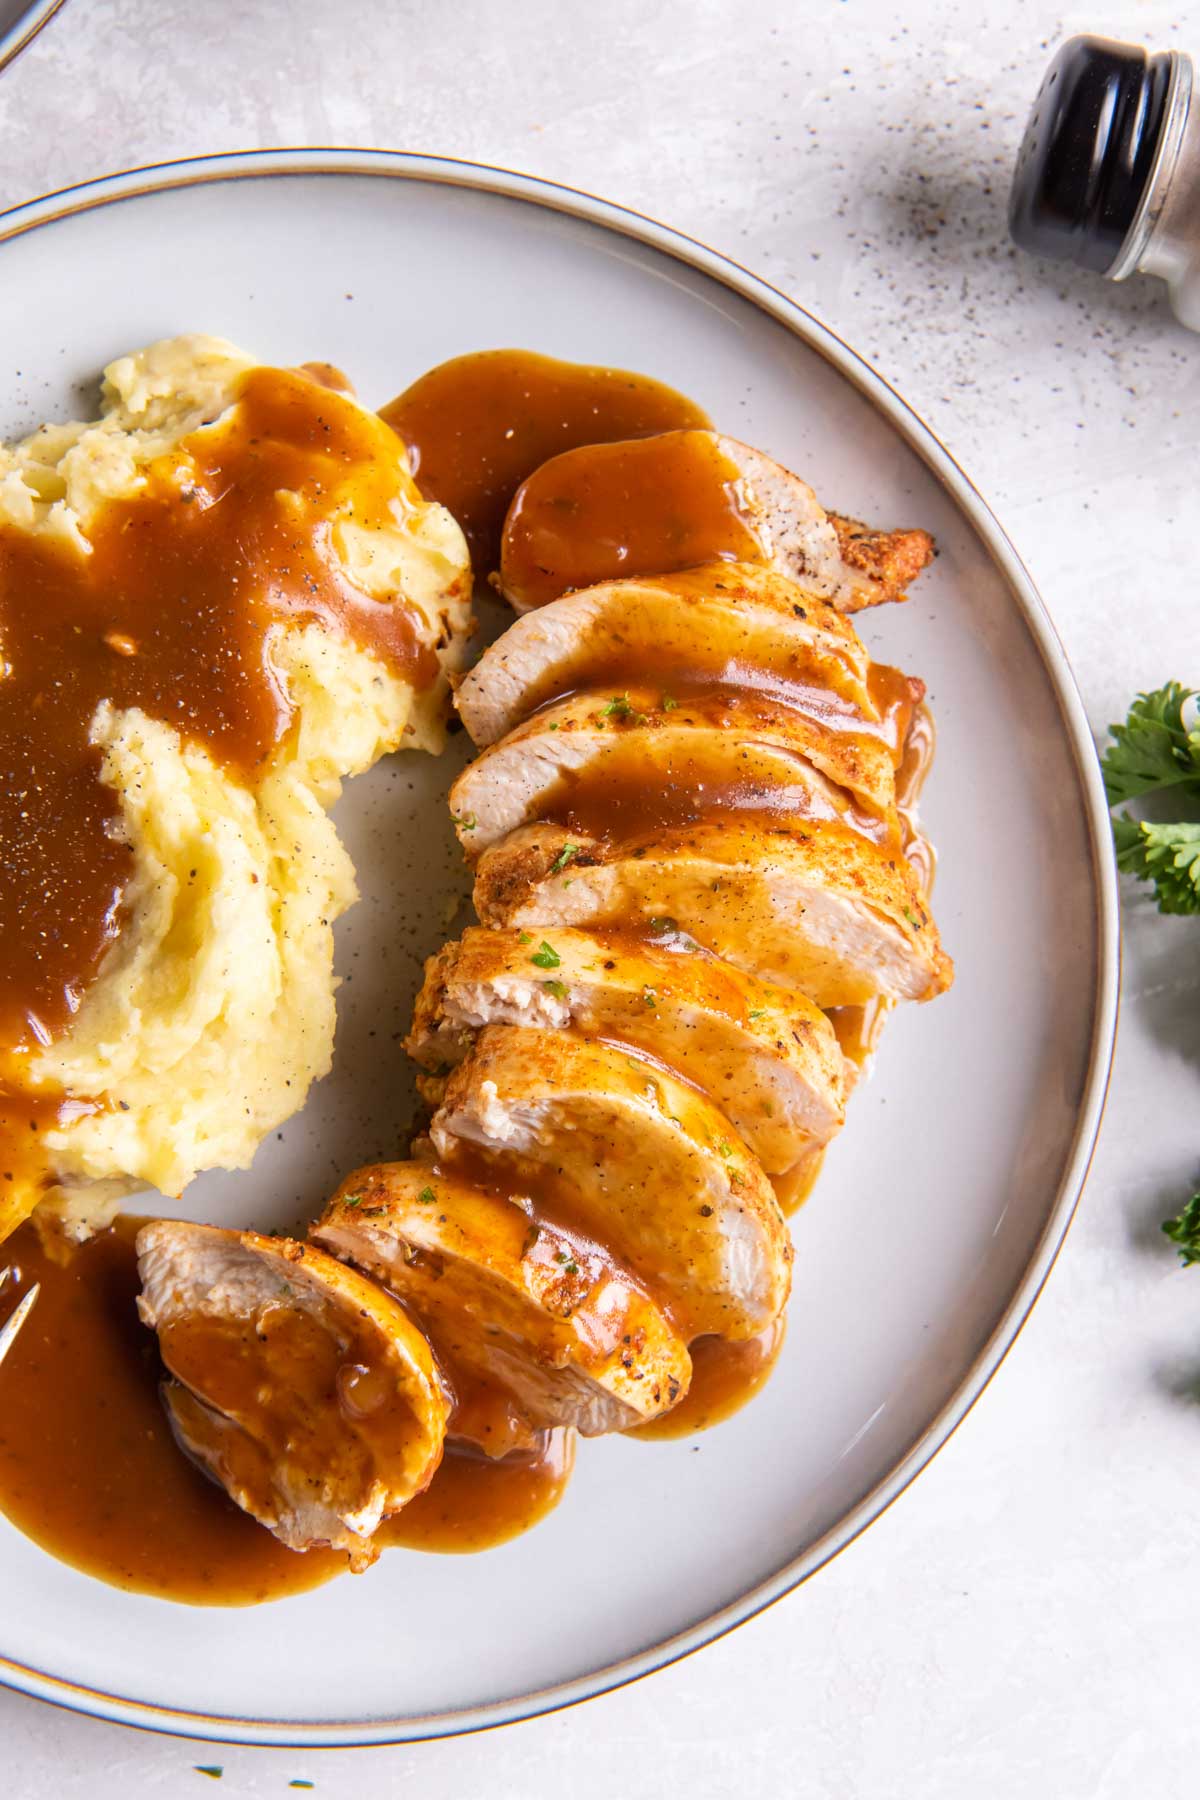 Sliced instant pot chicken breast drizzled with gravy with mashed potatoes on the side.